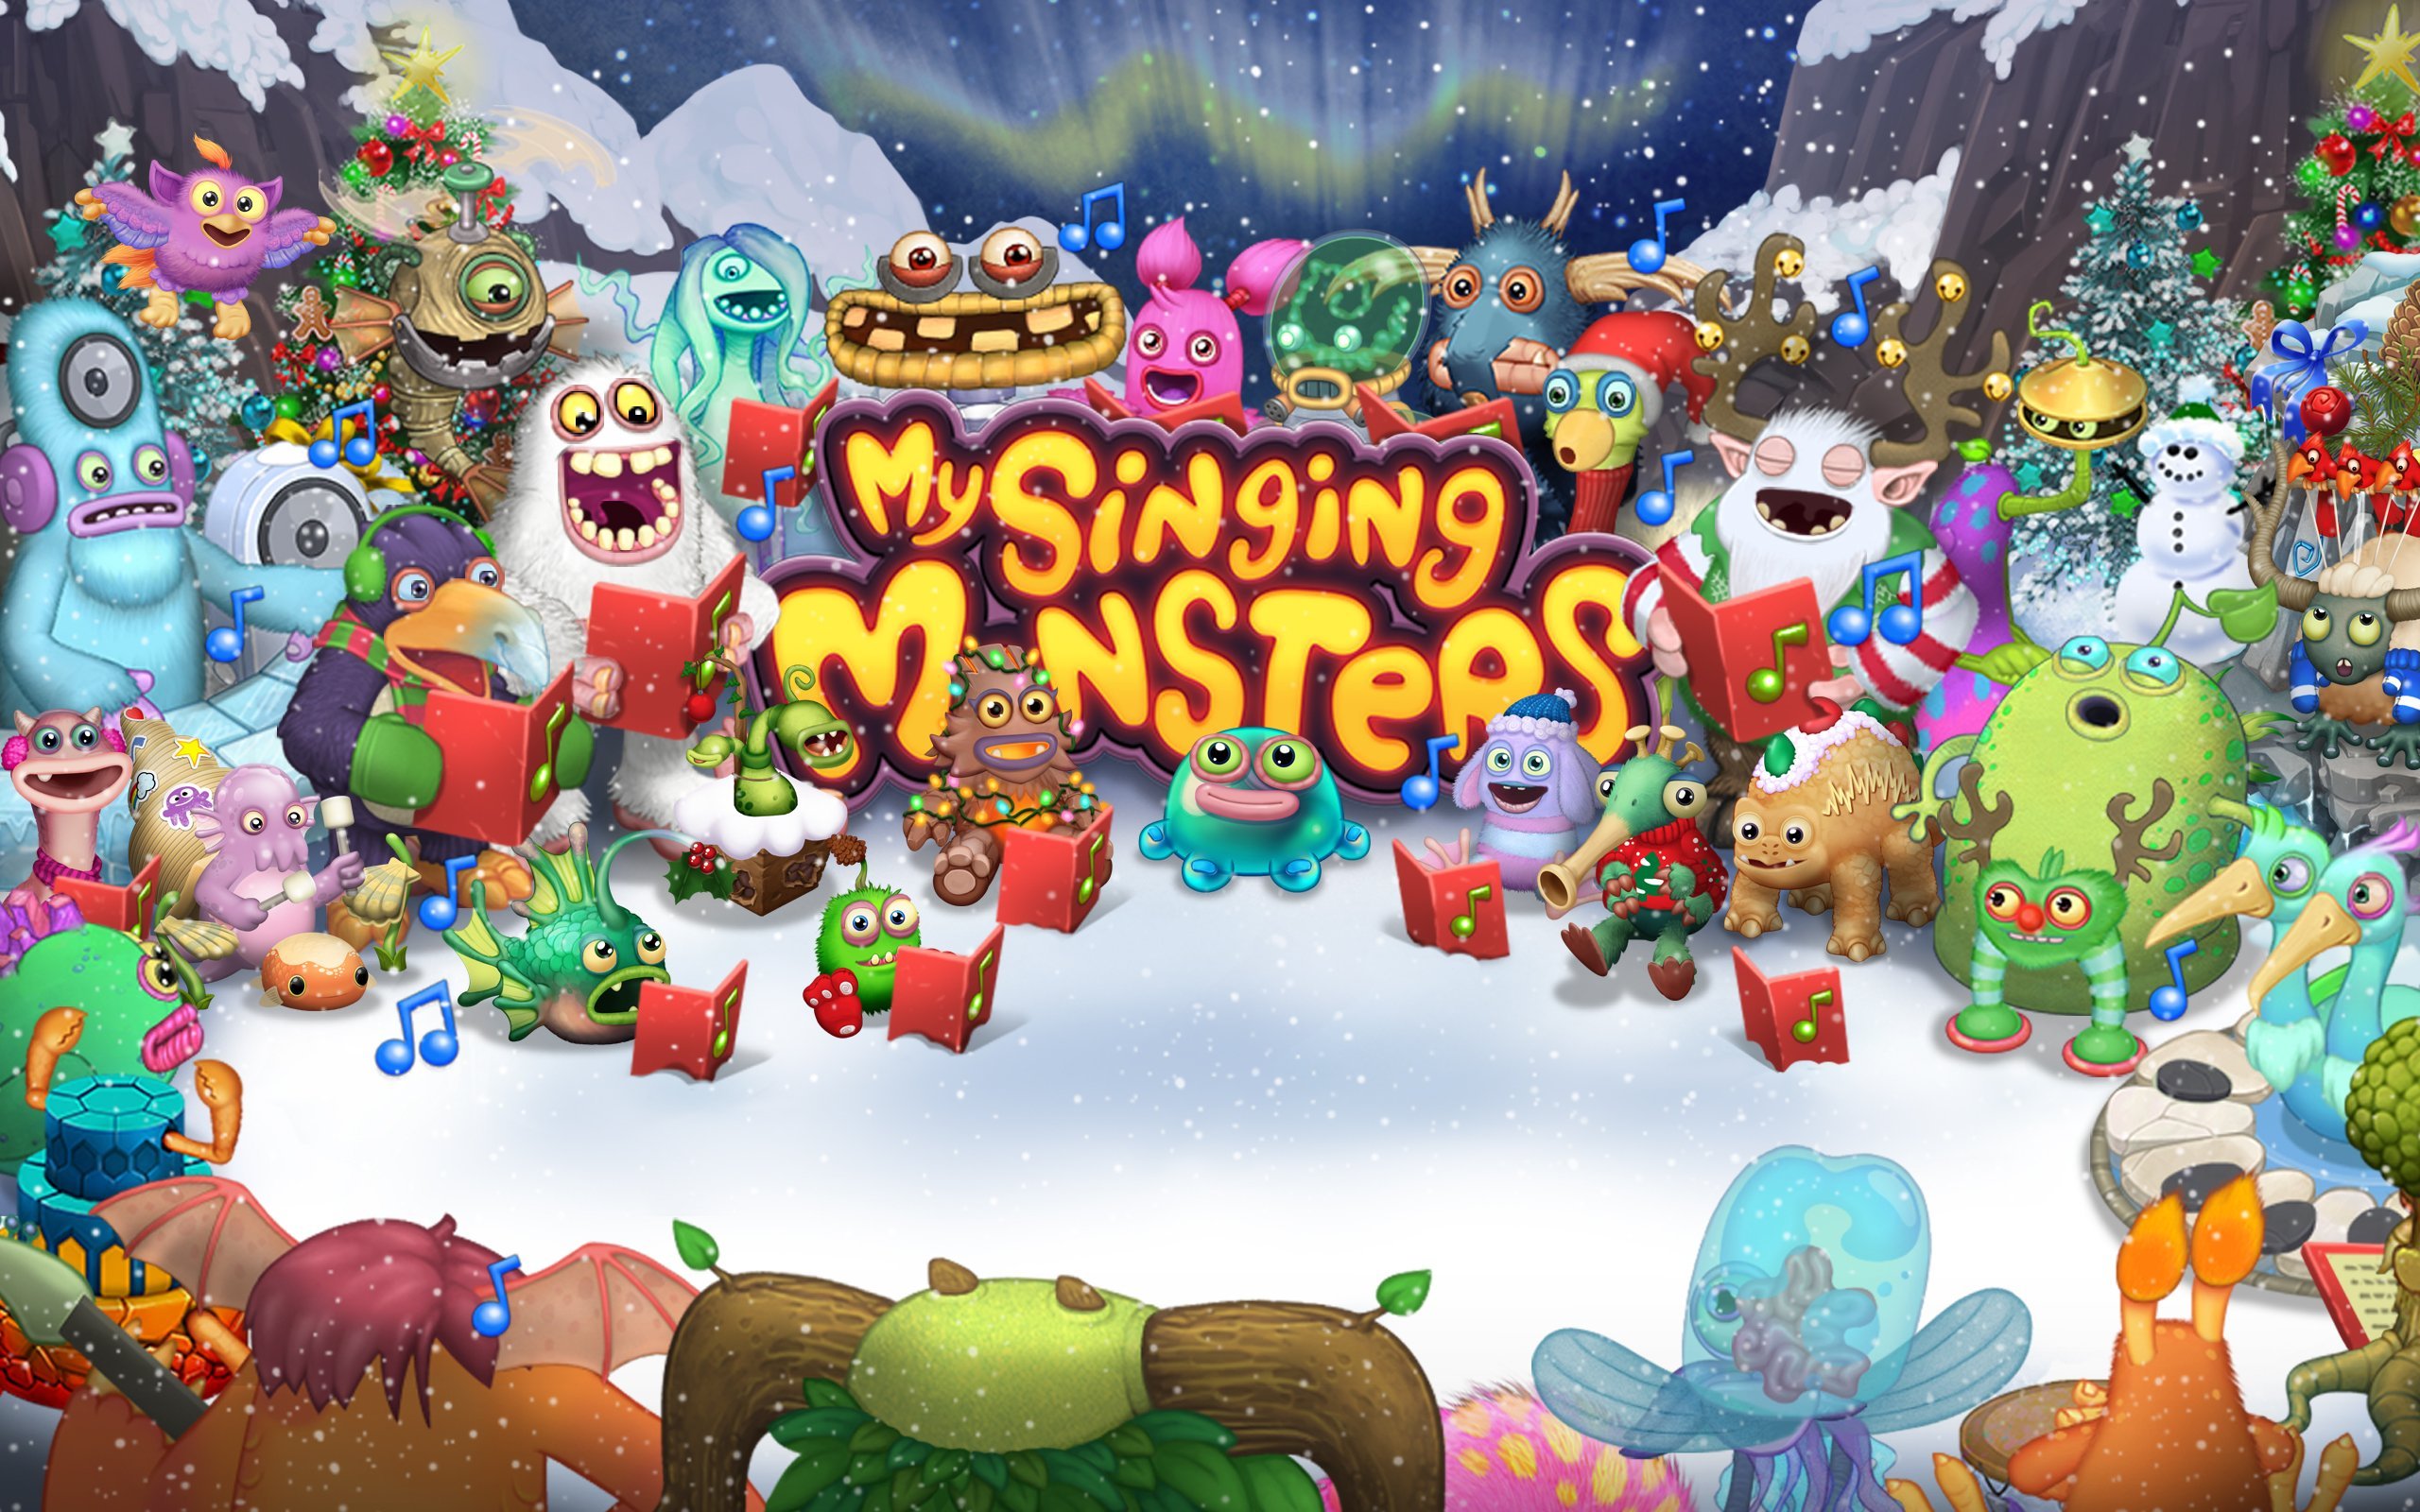 My Singing Monsters - #HappyHolidays from My Singing Monsters! Enjoy this gorgeous wallpaper created by our insanely talented artists!